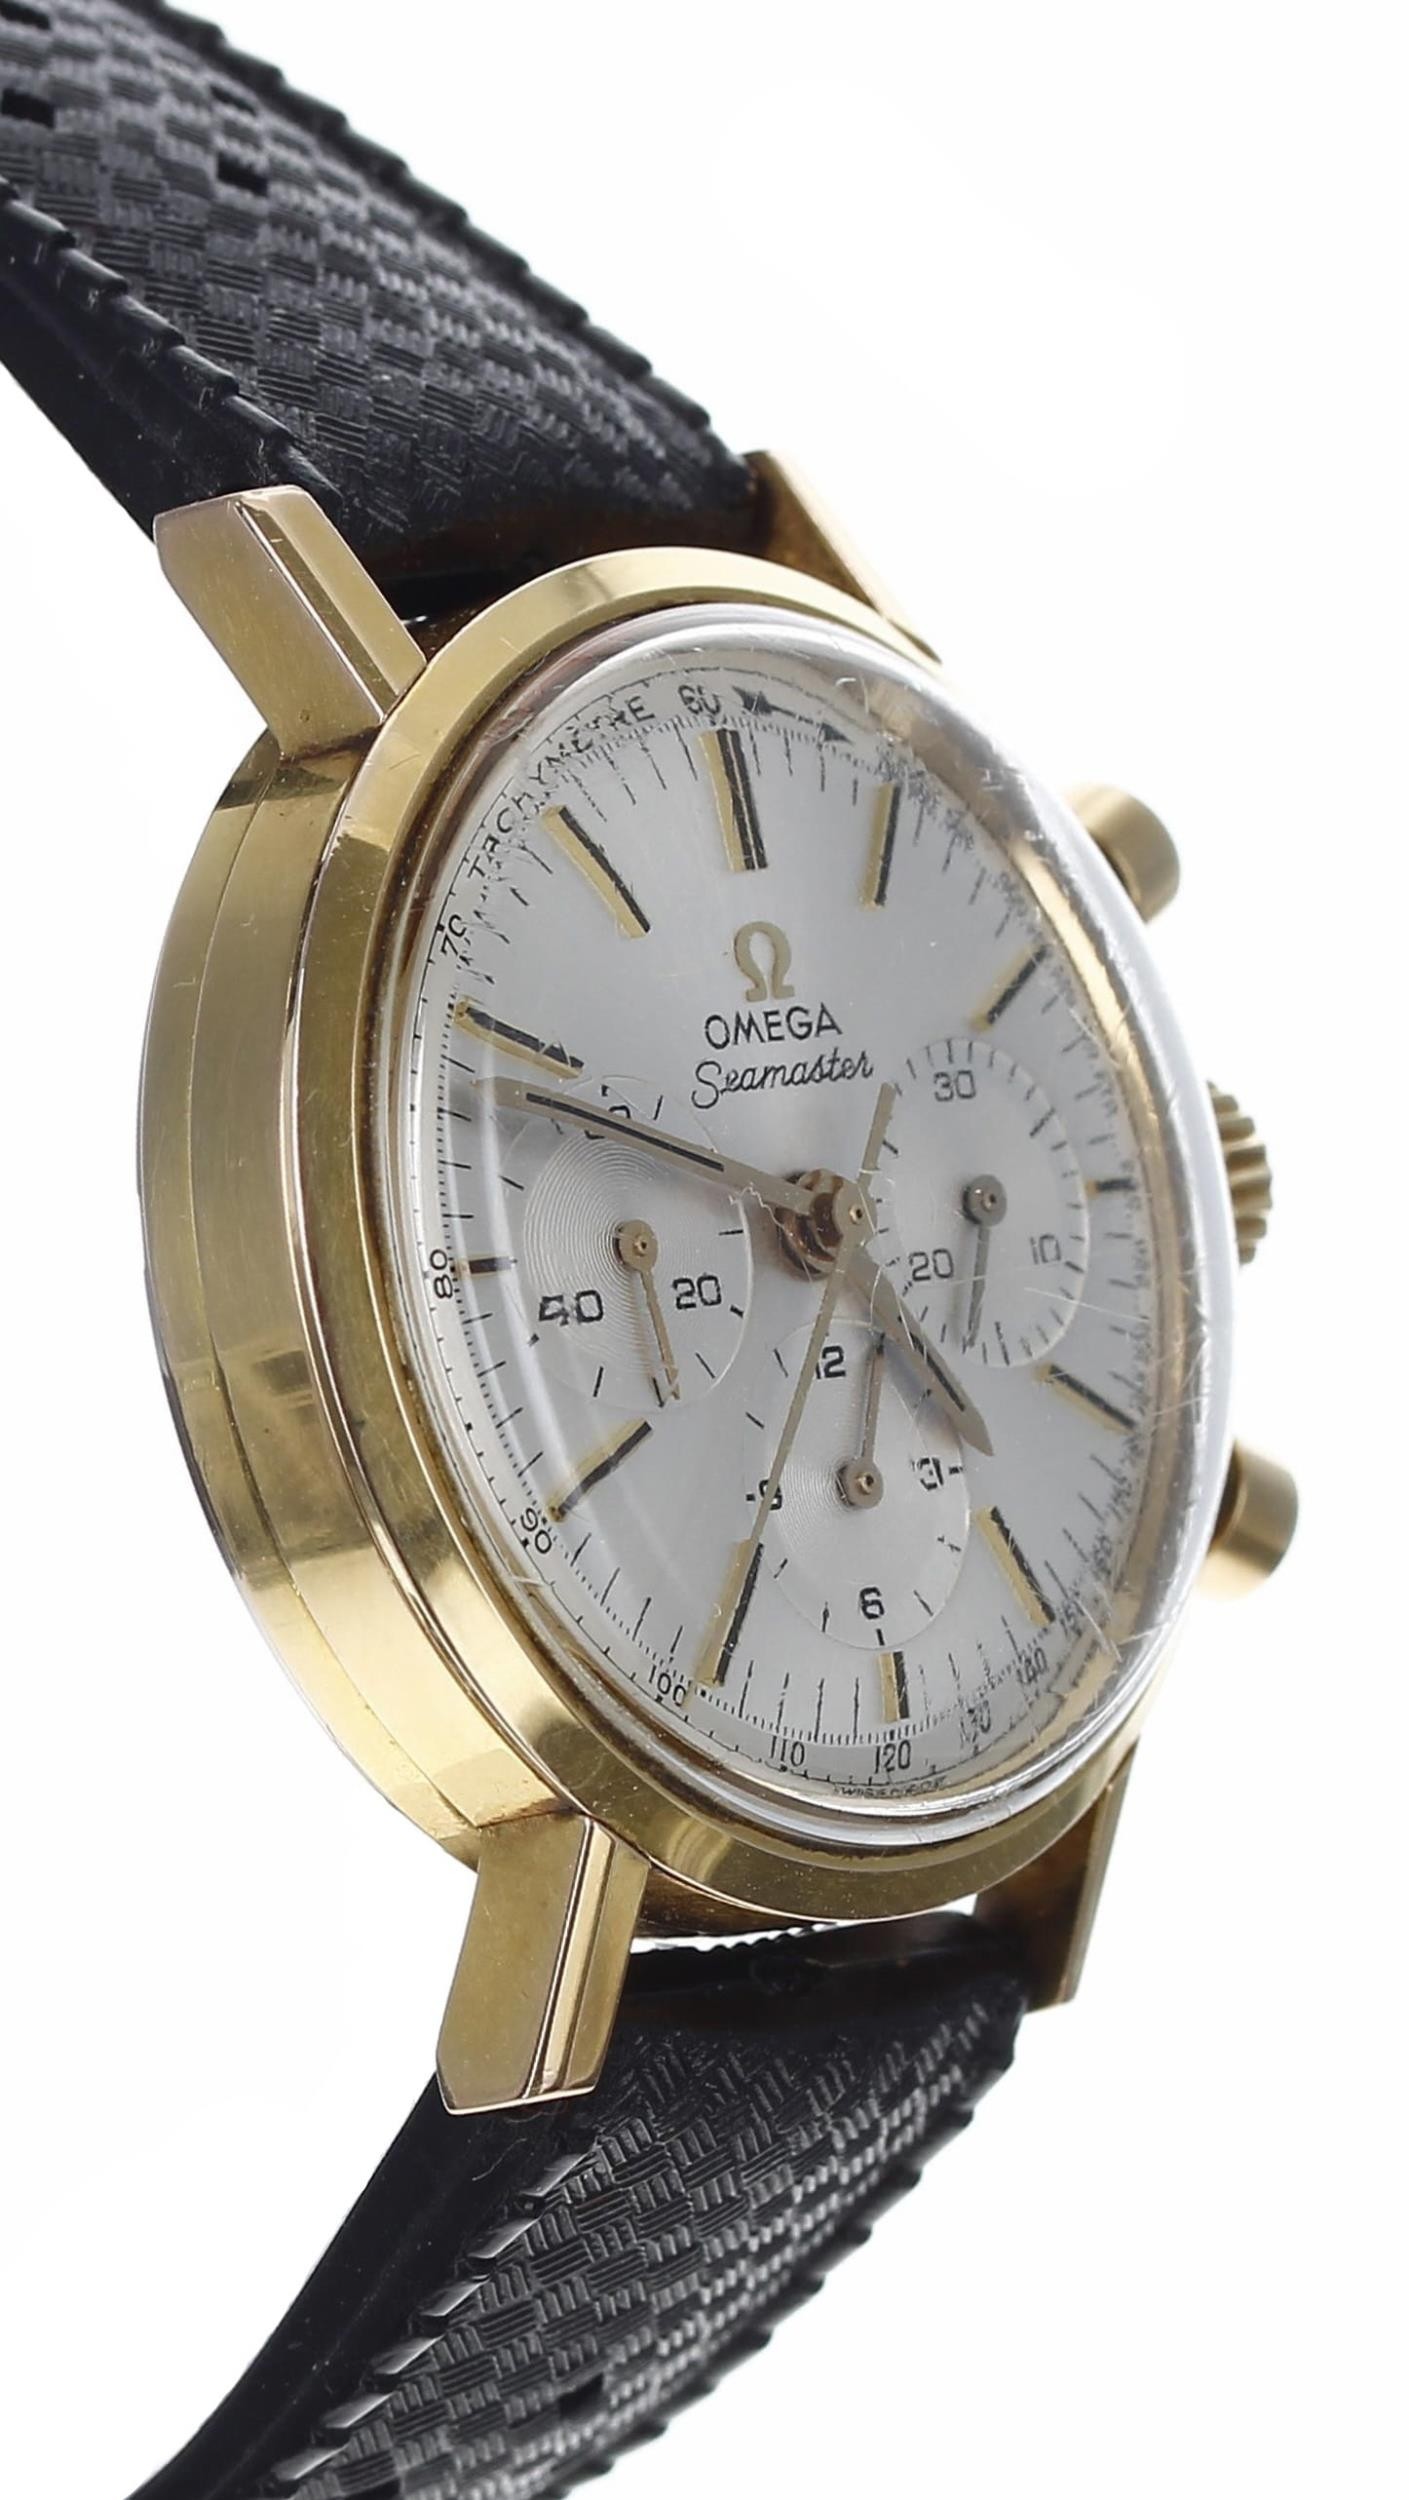 Omega Seamaster Chronograph gold plated and stainless steel gentleman's wristwatch, reference no. - Image 5 of 7